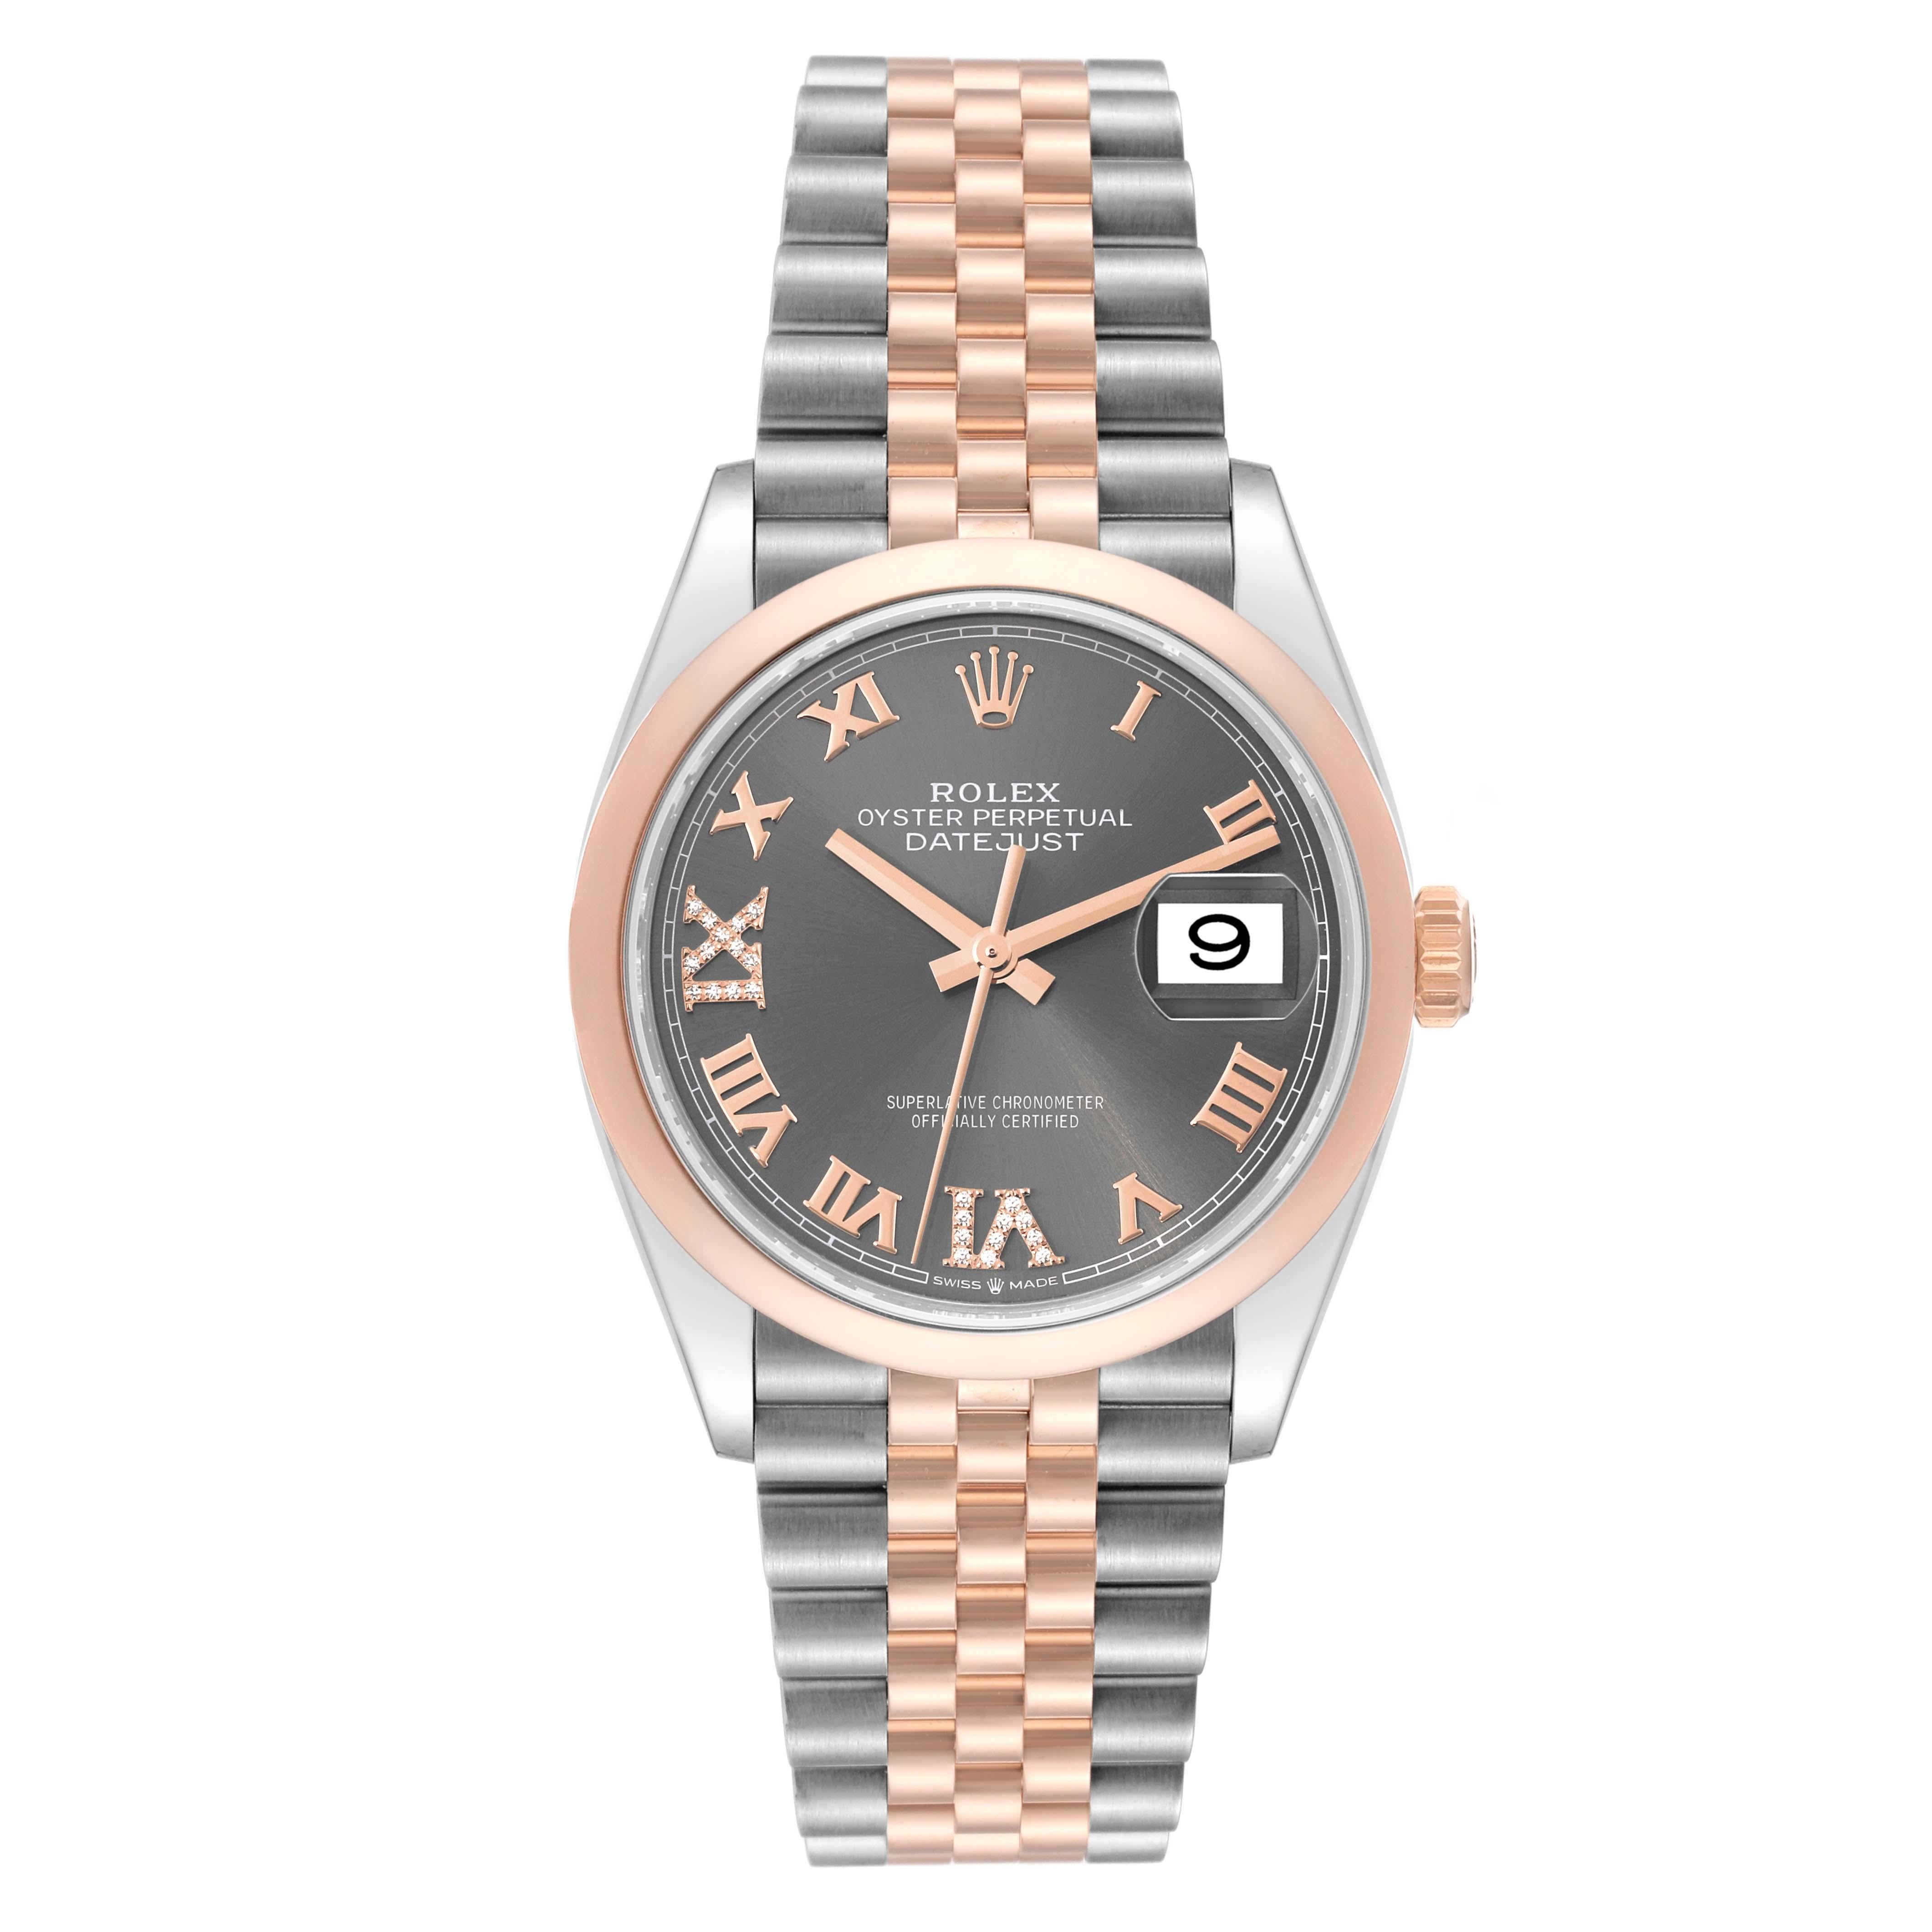 Rolex Datejust 36 Steel Rose Gold Slate Diamond Dial Mens Watch 126201 Box Card. Officially certified chronometer automatic self-winding movement with quickset date. Stainless steel case 36 mm in diameter.  Rolex logo on an 18K rose gold crown. 18k